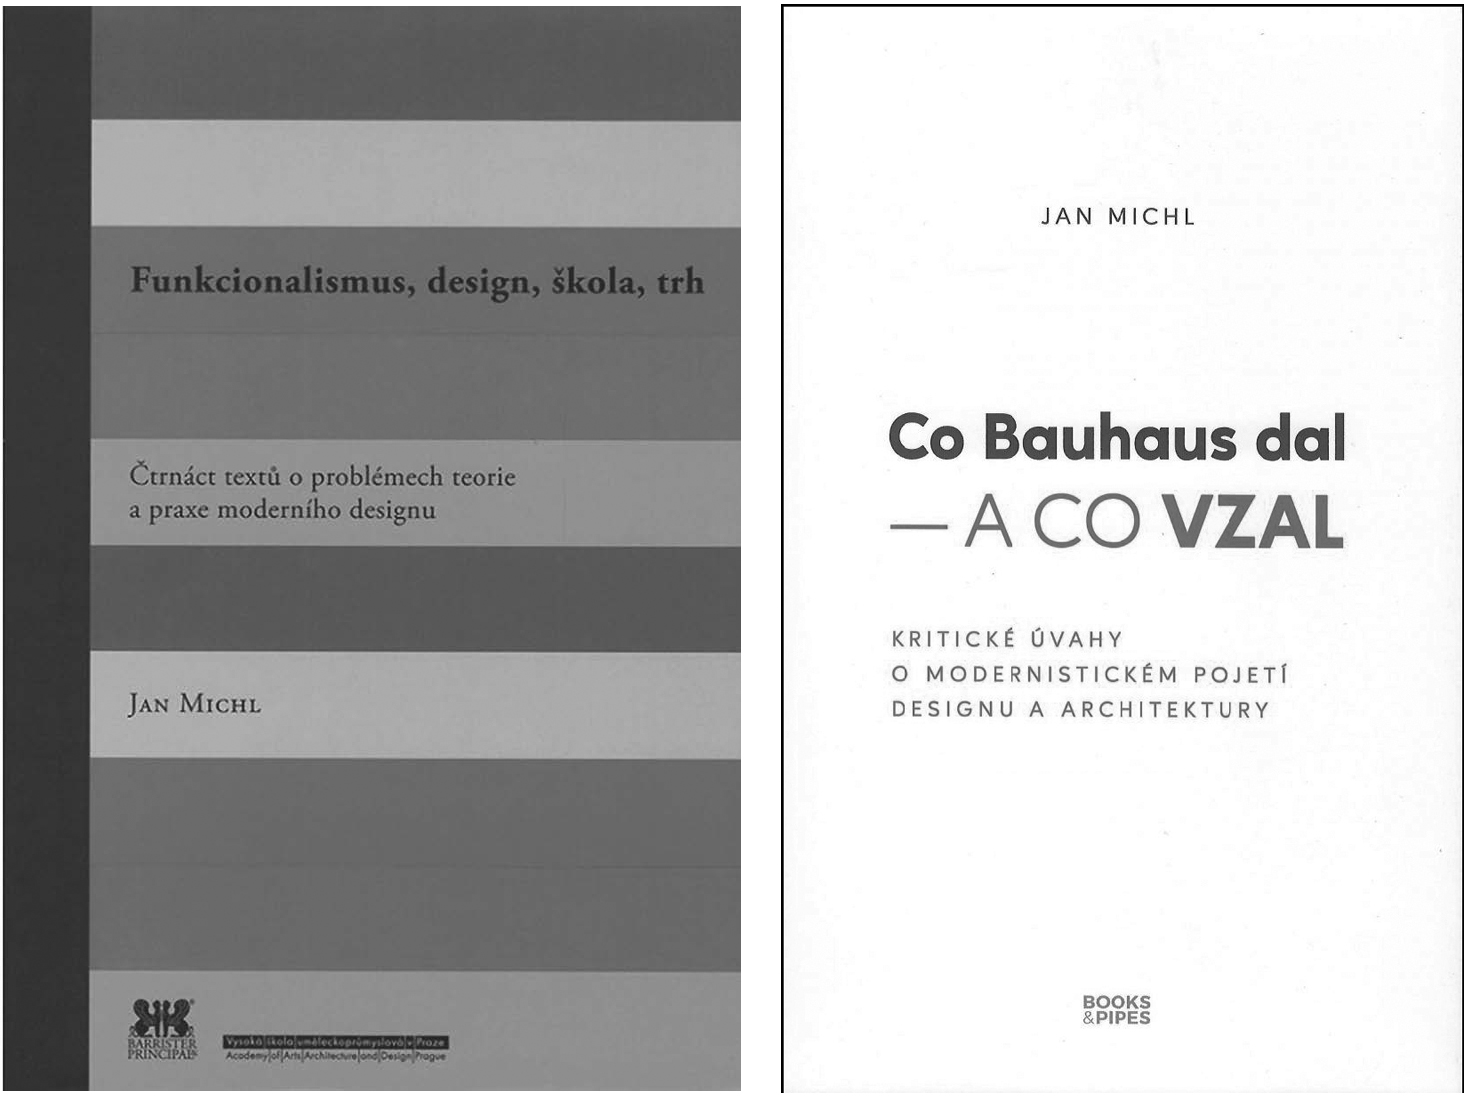 Two Books of Related Subject Matter Addressing the Critique of Modernist Views on Design and Architecture